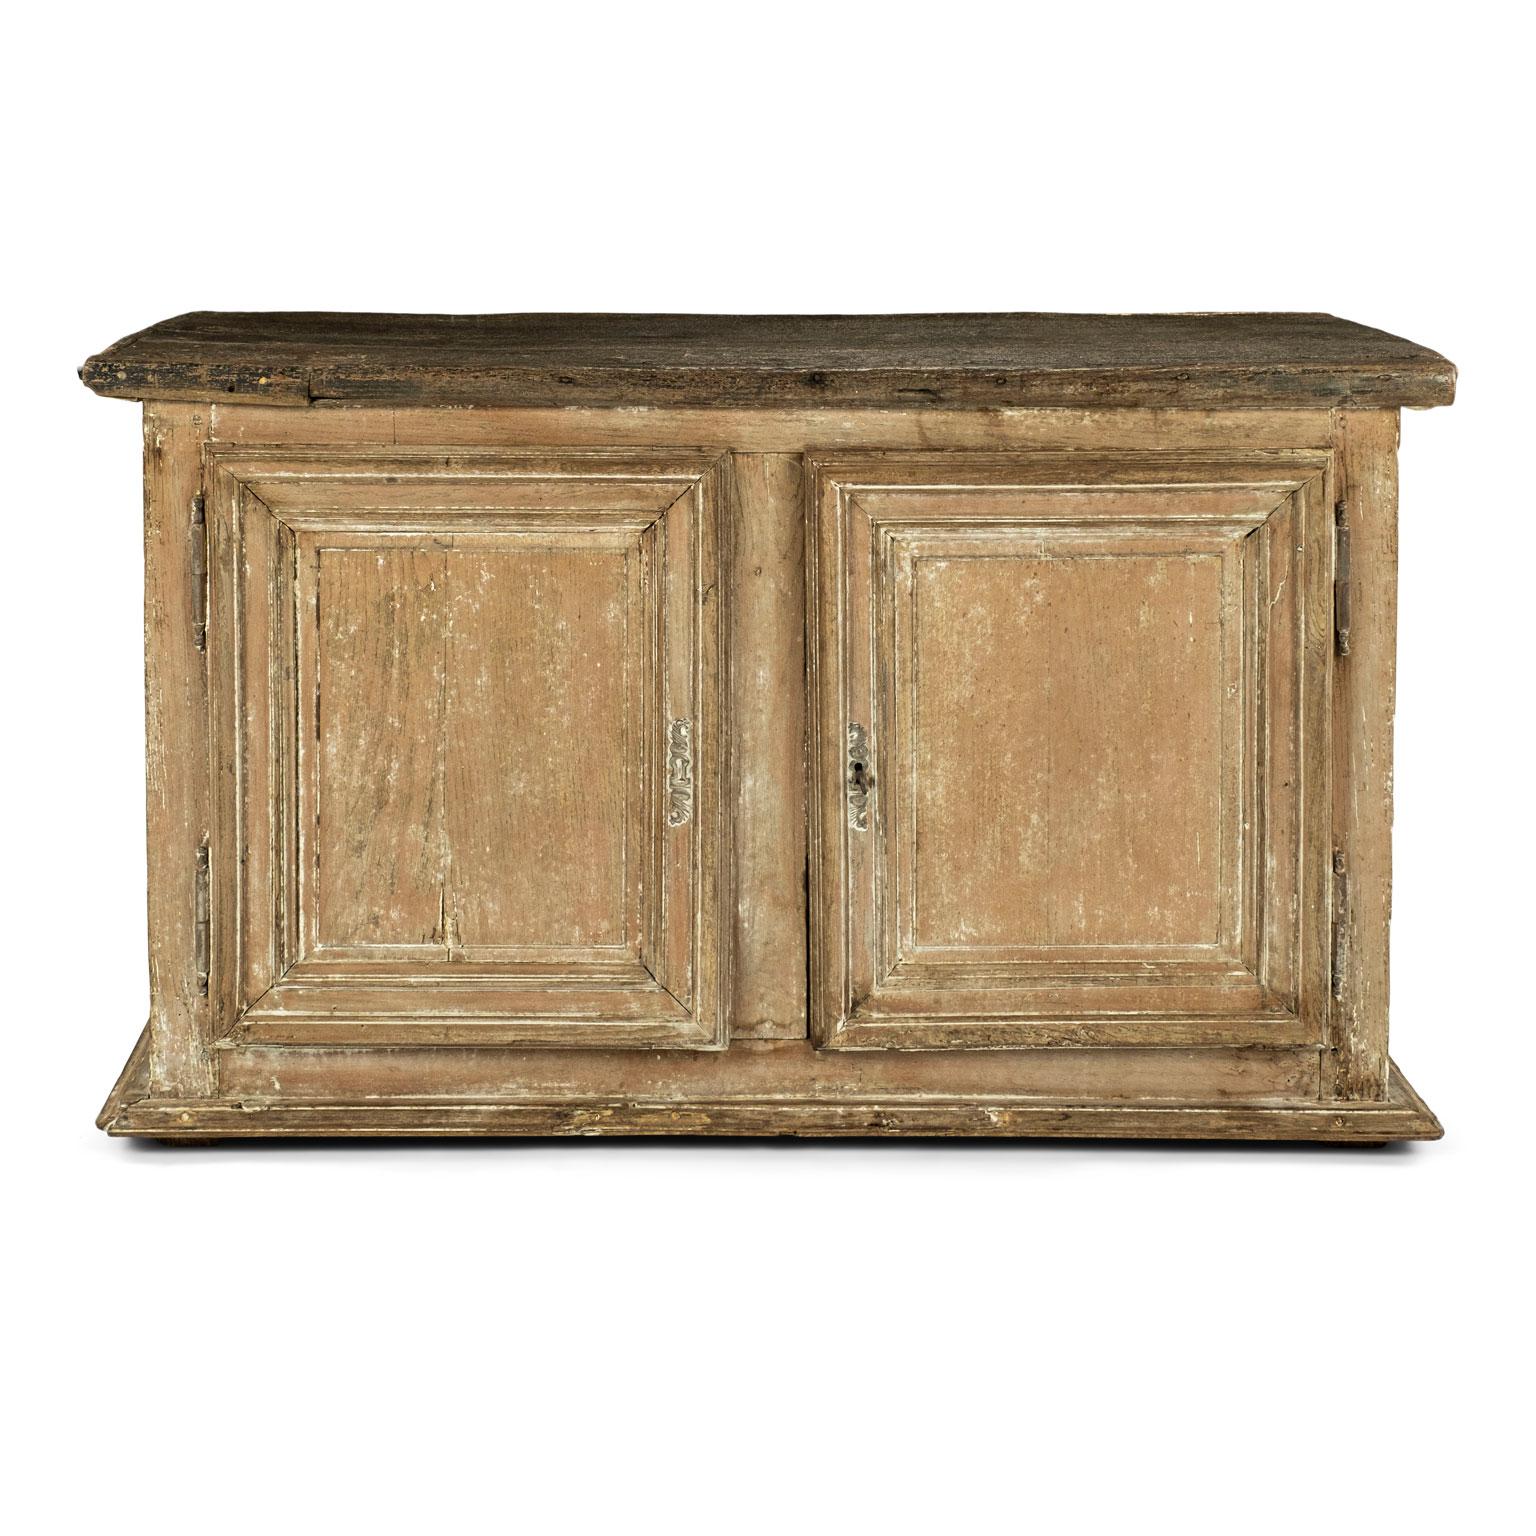 Large-scale two-door painted buffet dating to the 19th century. Mortise and tenon construction. Original trim molding applied around doors and lower edge. Scraped finish. Working lock. Rustic top is not original, but created from antique wood. Long